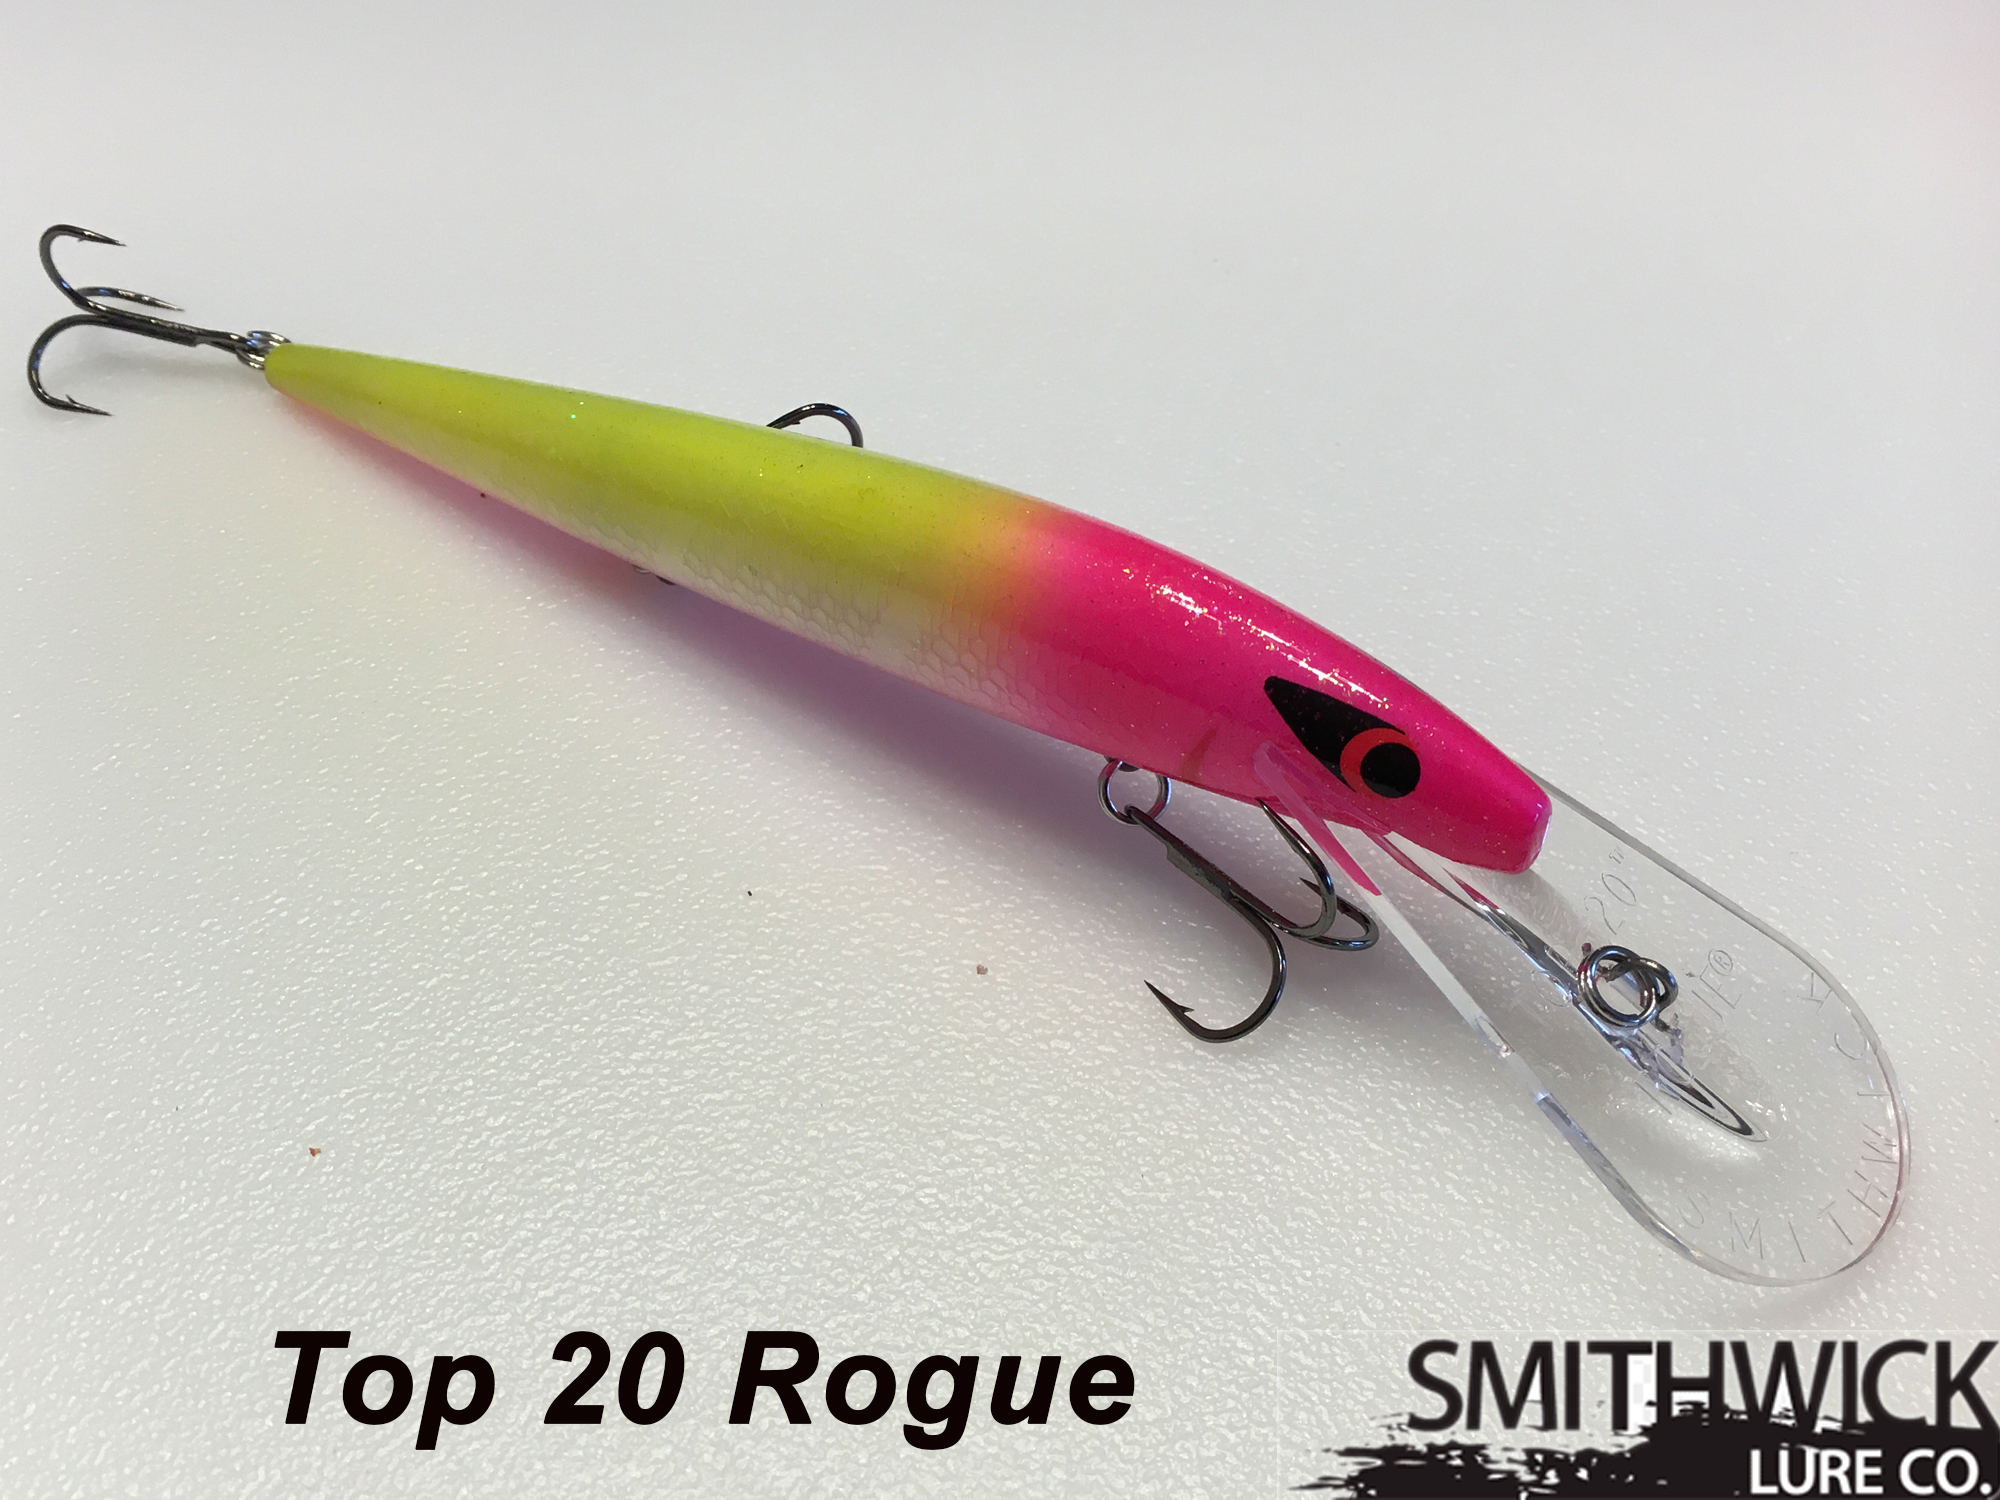 Top 20 Rogue Pink Lemonade- Smithwick Top 20 Rogue- - Erie Outfitters